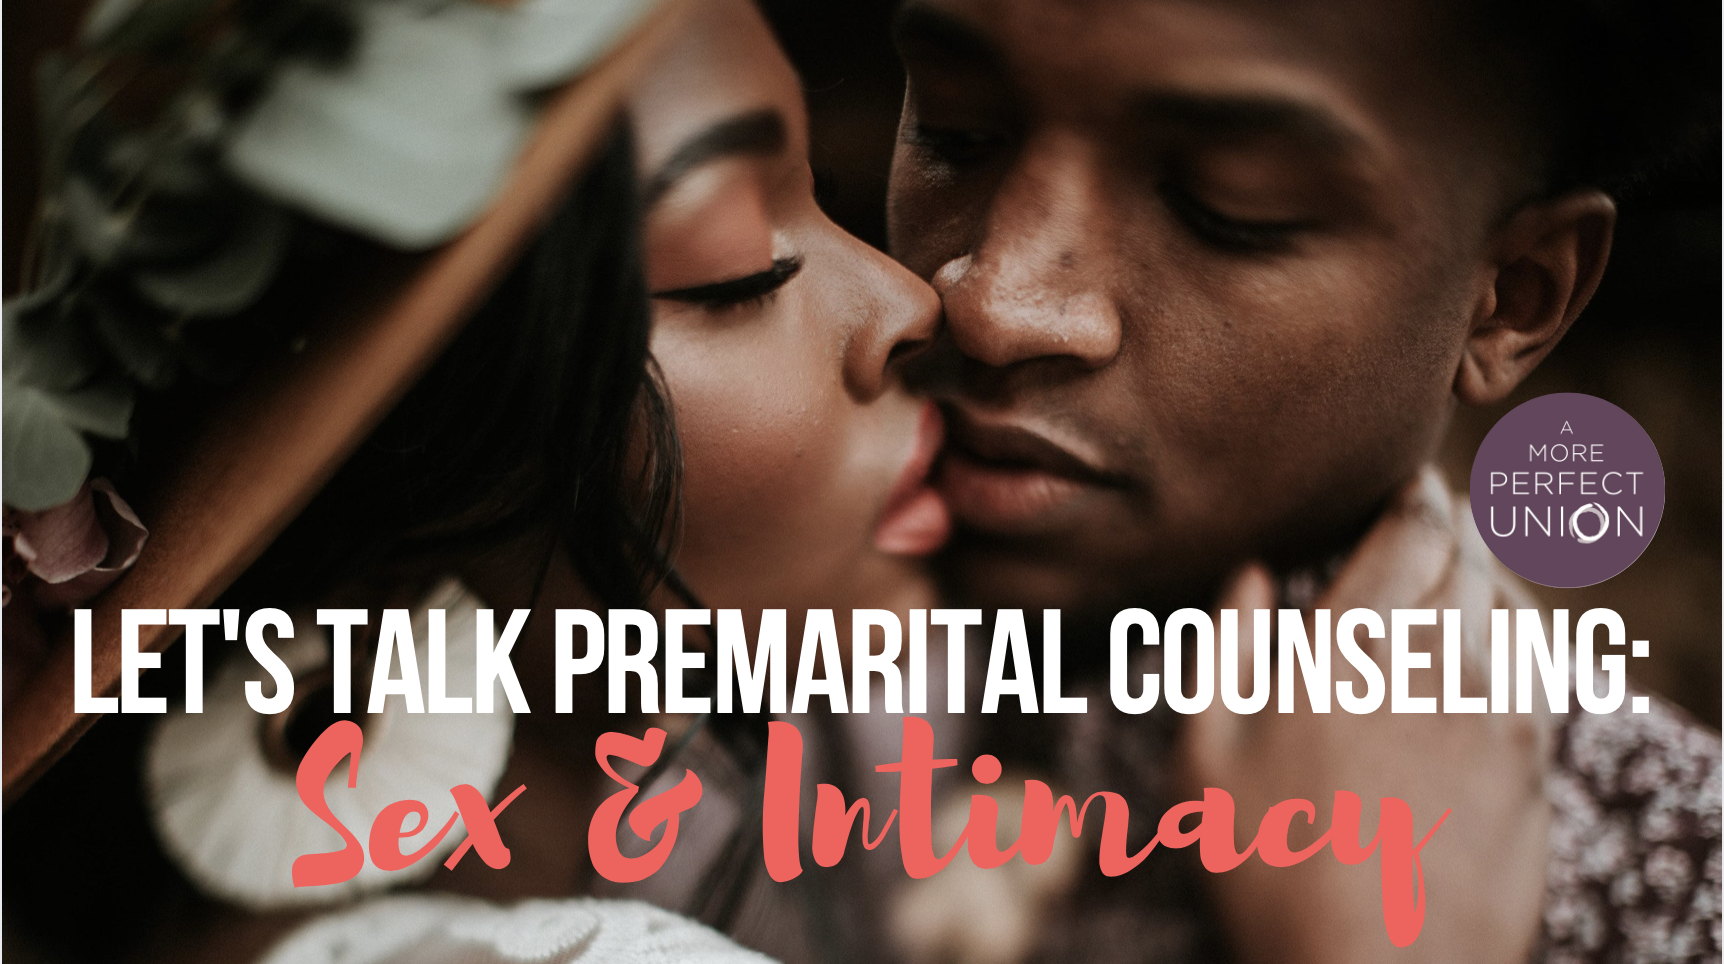 Premarital Counseling Sex and Intimacy — A More Perfect Union pic